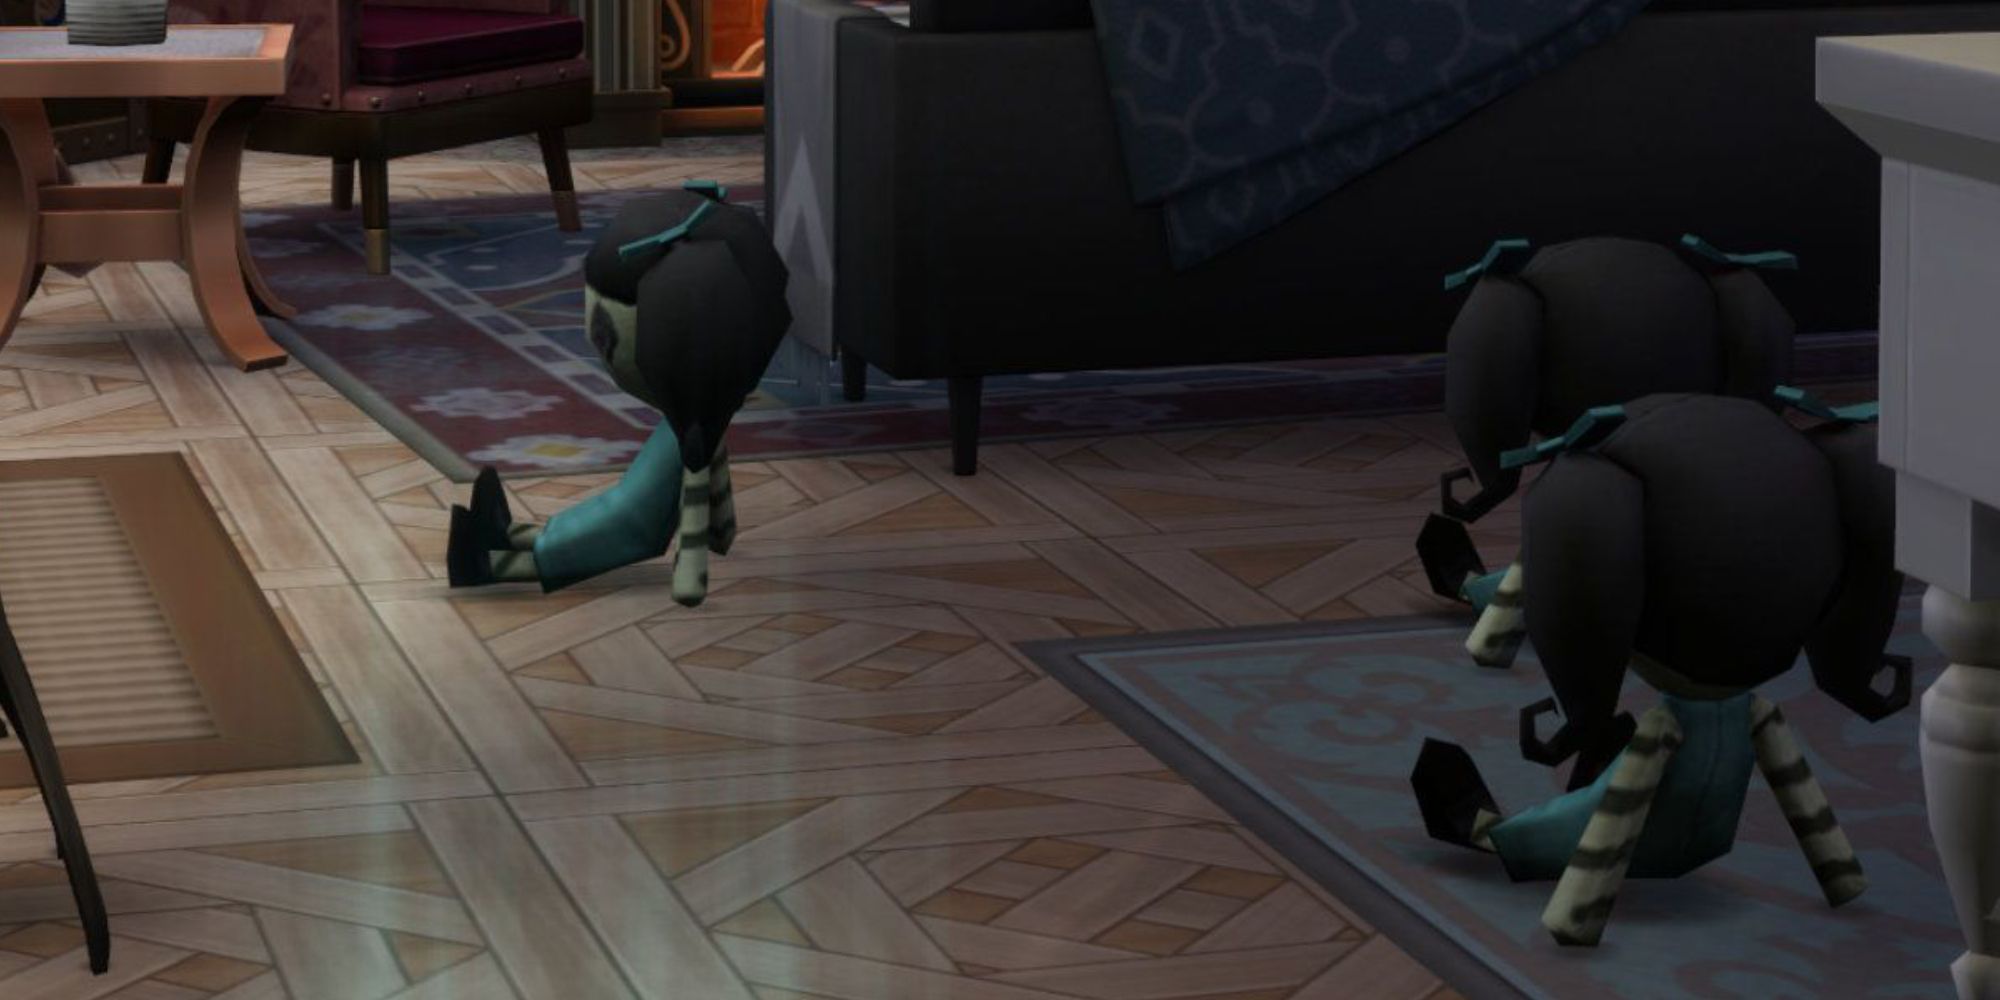 The Sims 4 Paranormal Stuff close up of spooky dolls